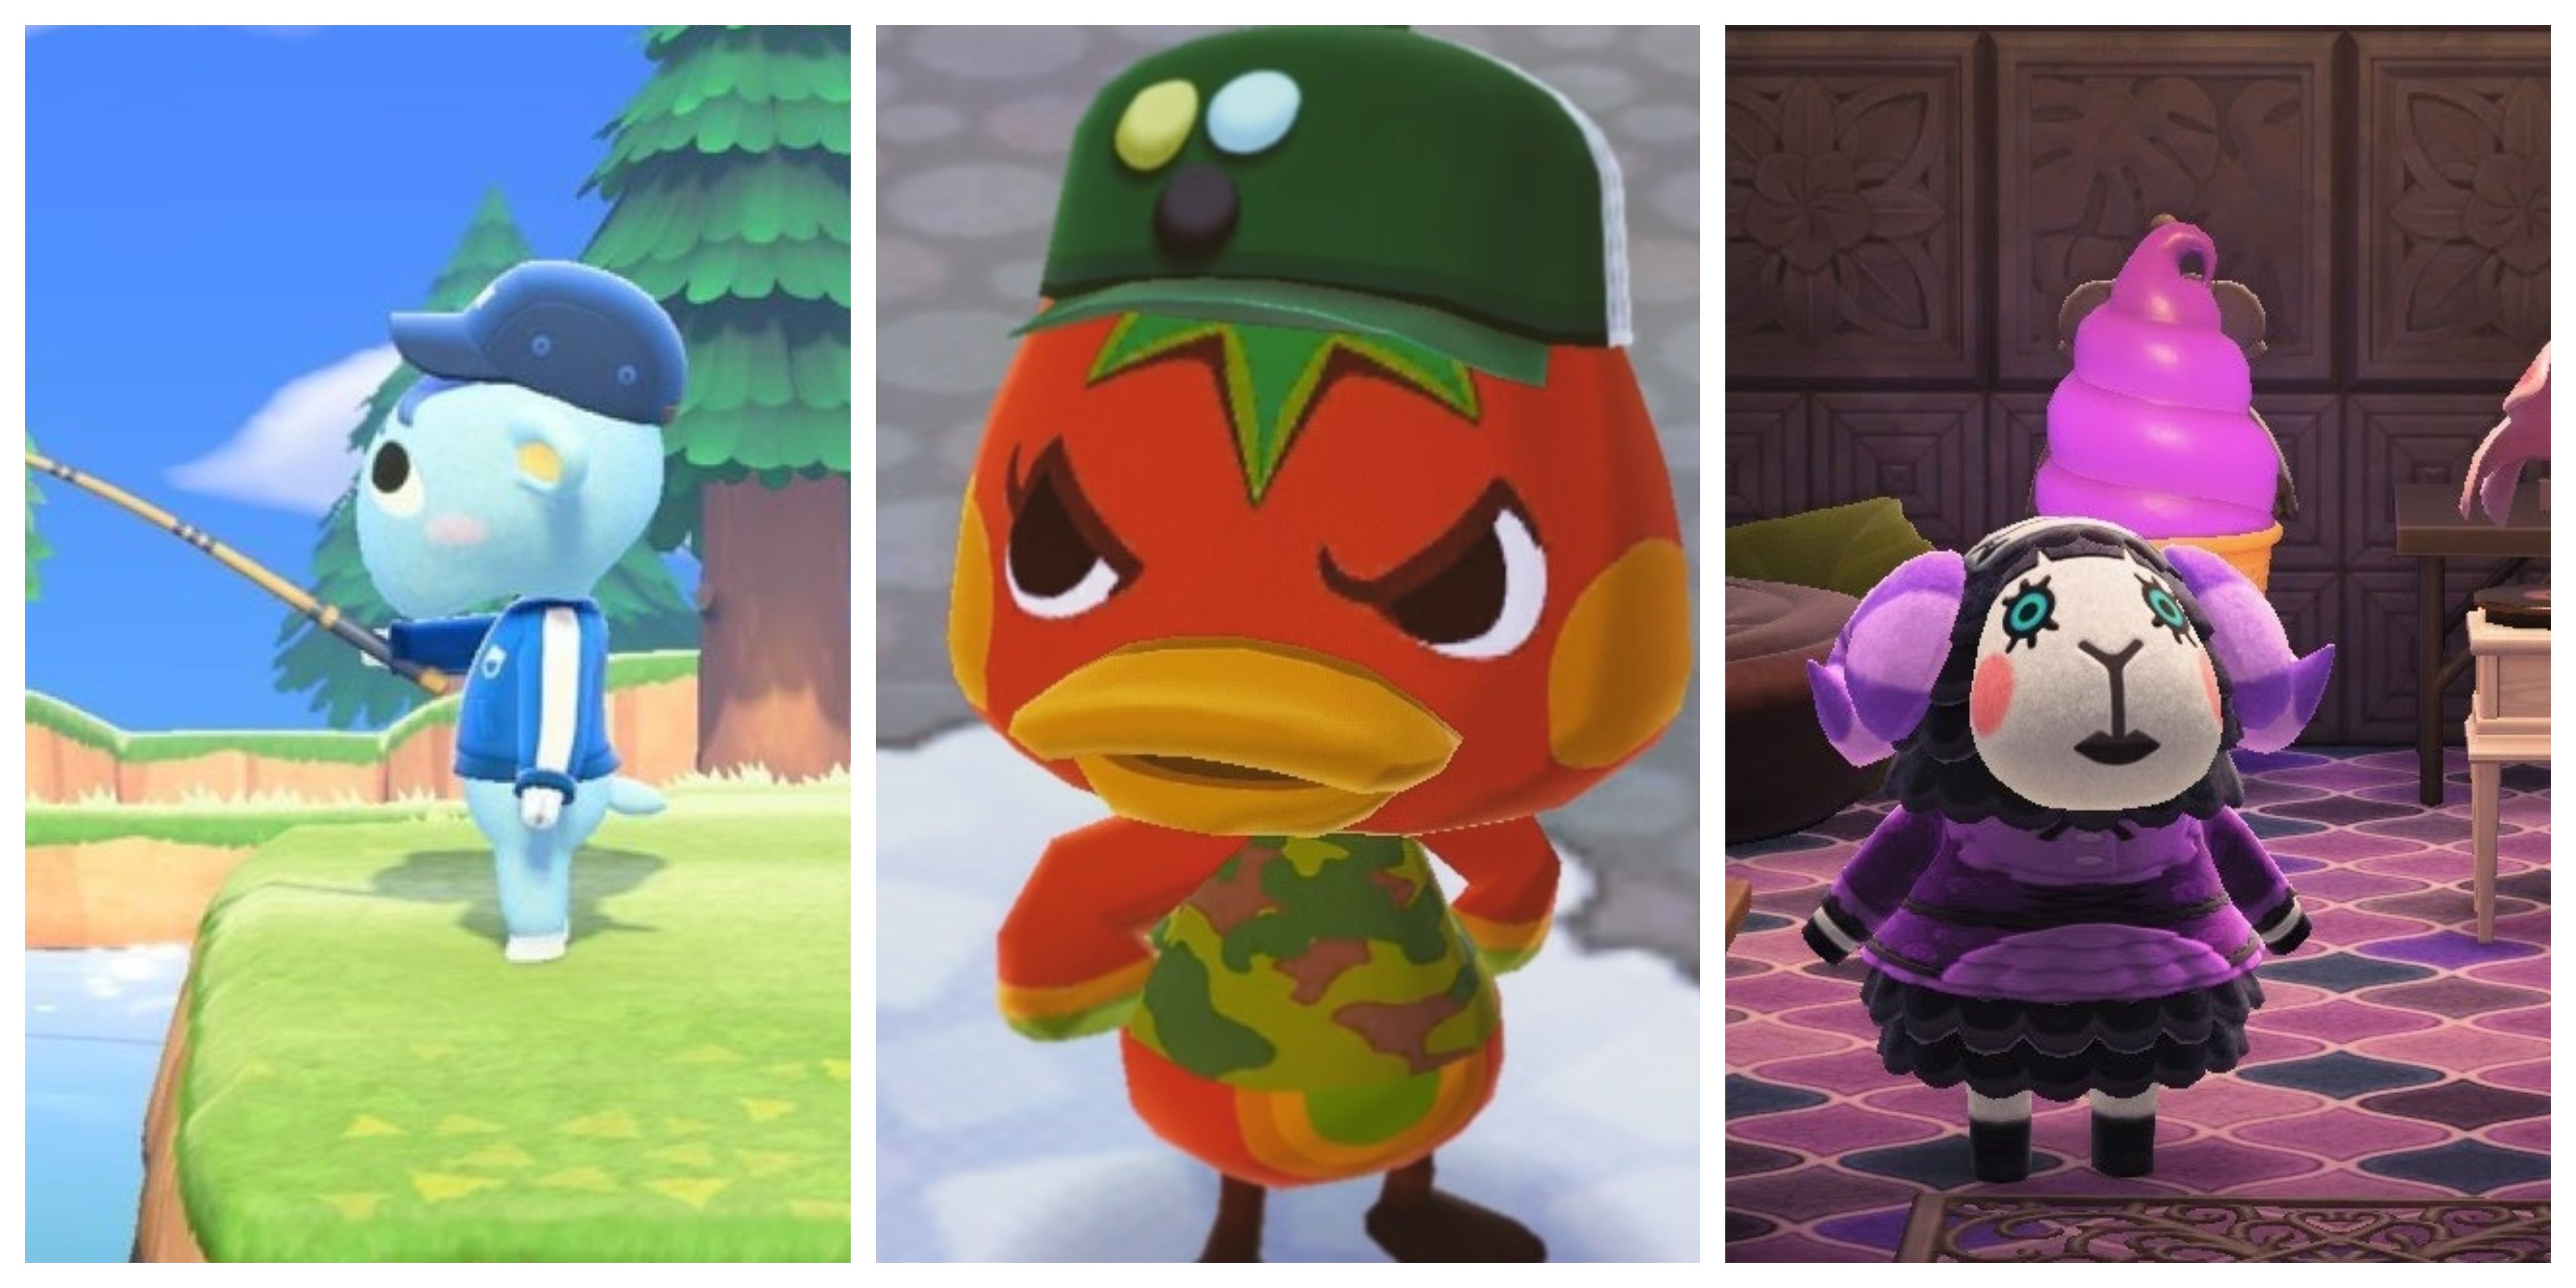 Animal Crossing New Horizons 10 Islanders We'd Love To Hang Out With In Real Life